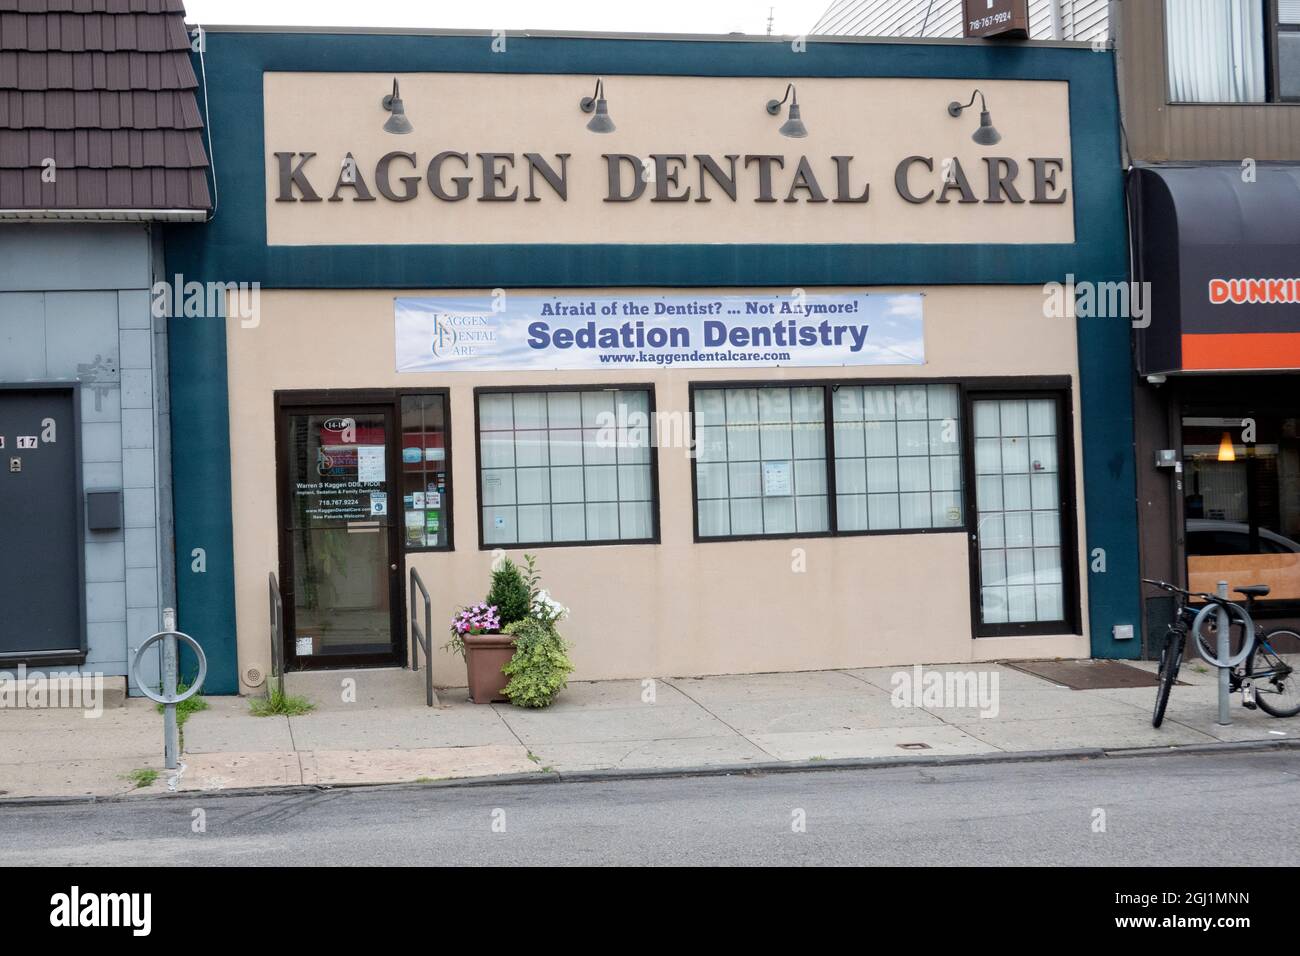 The exterior of a dental office attempting to attract people afraid of dentists by readily offering sedation. In Whitestone, Queens, New York Citty. Stock Photo